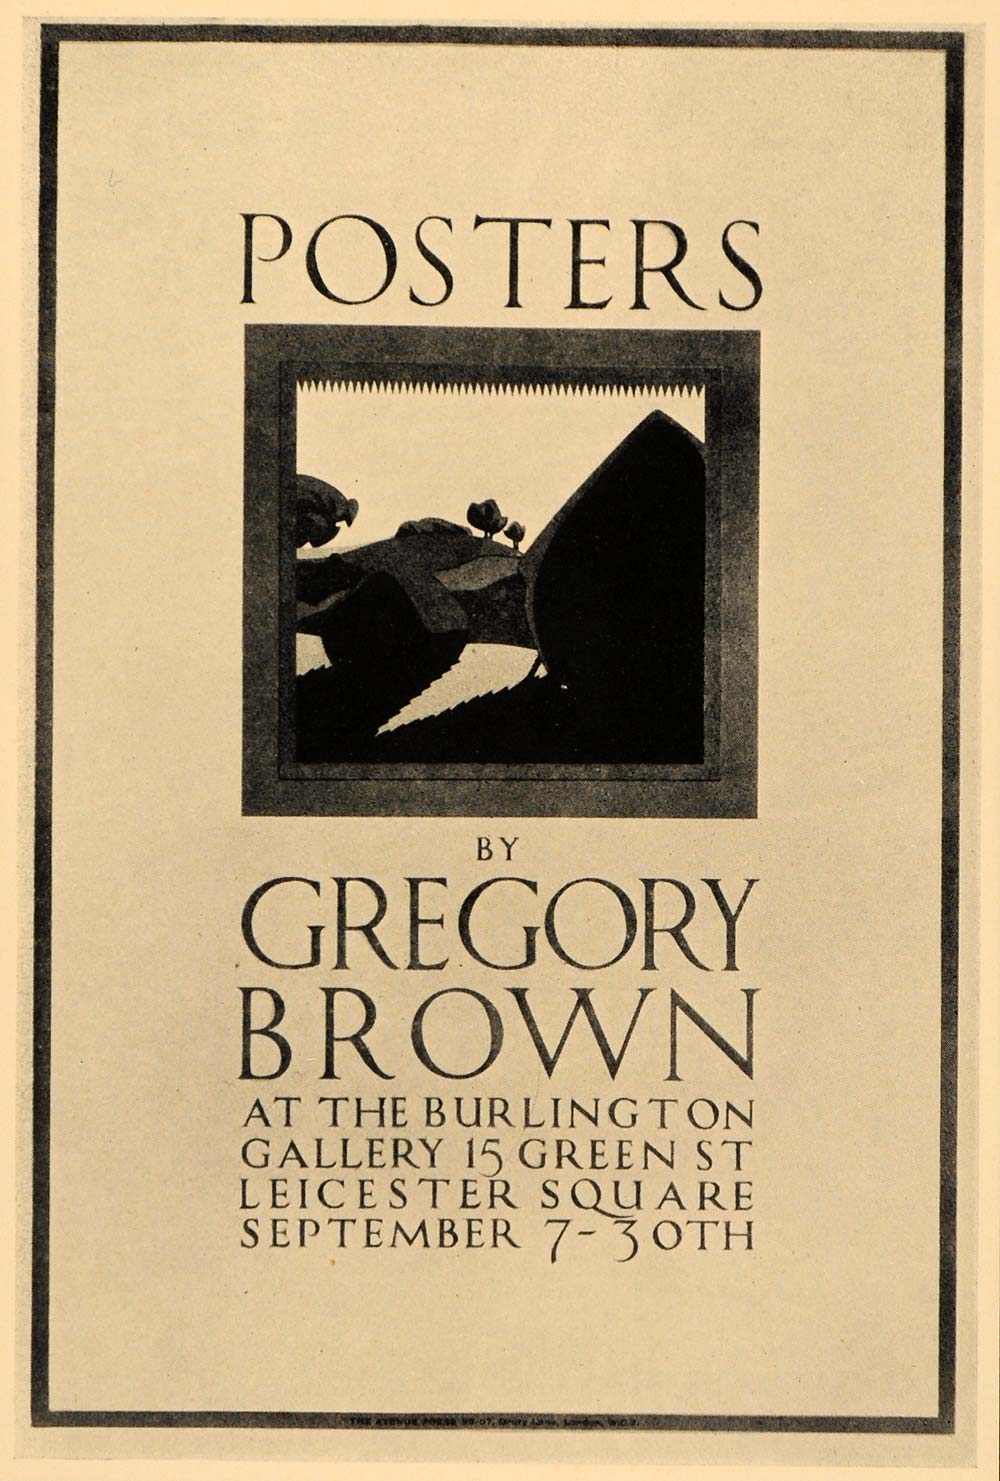 1933 Exhibition Posters Gregory Brown London Print Landscape Typography POSA6